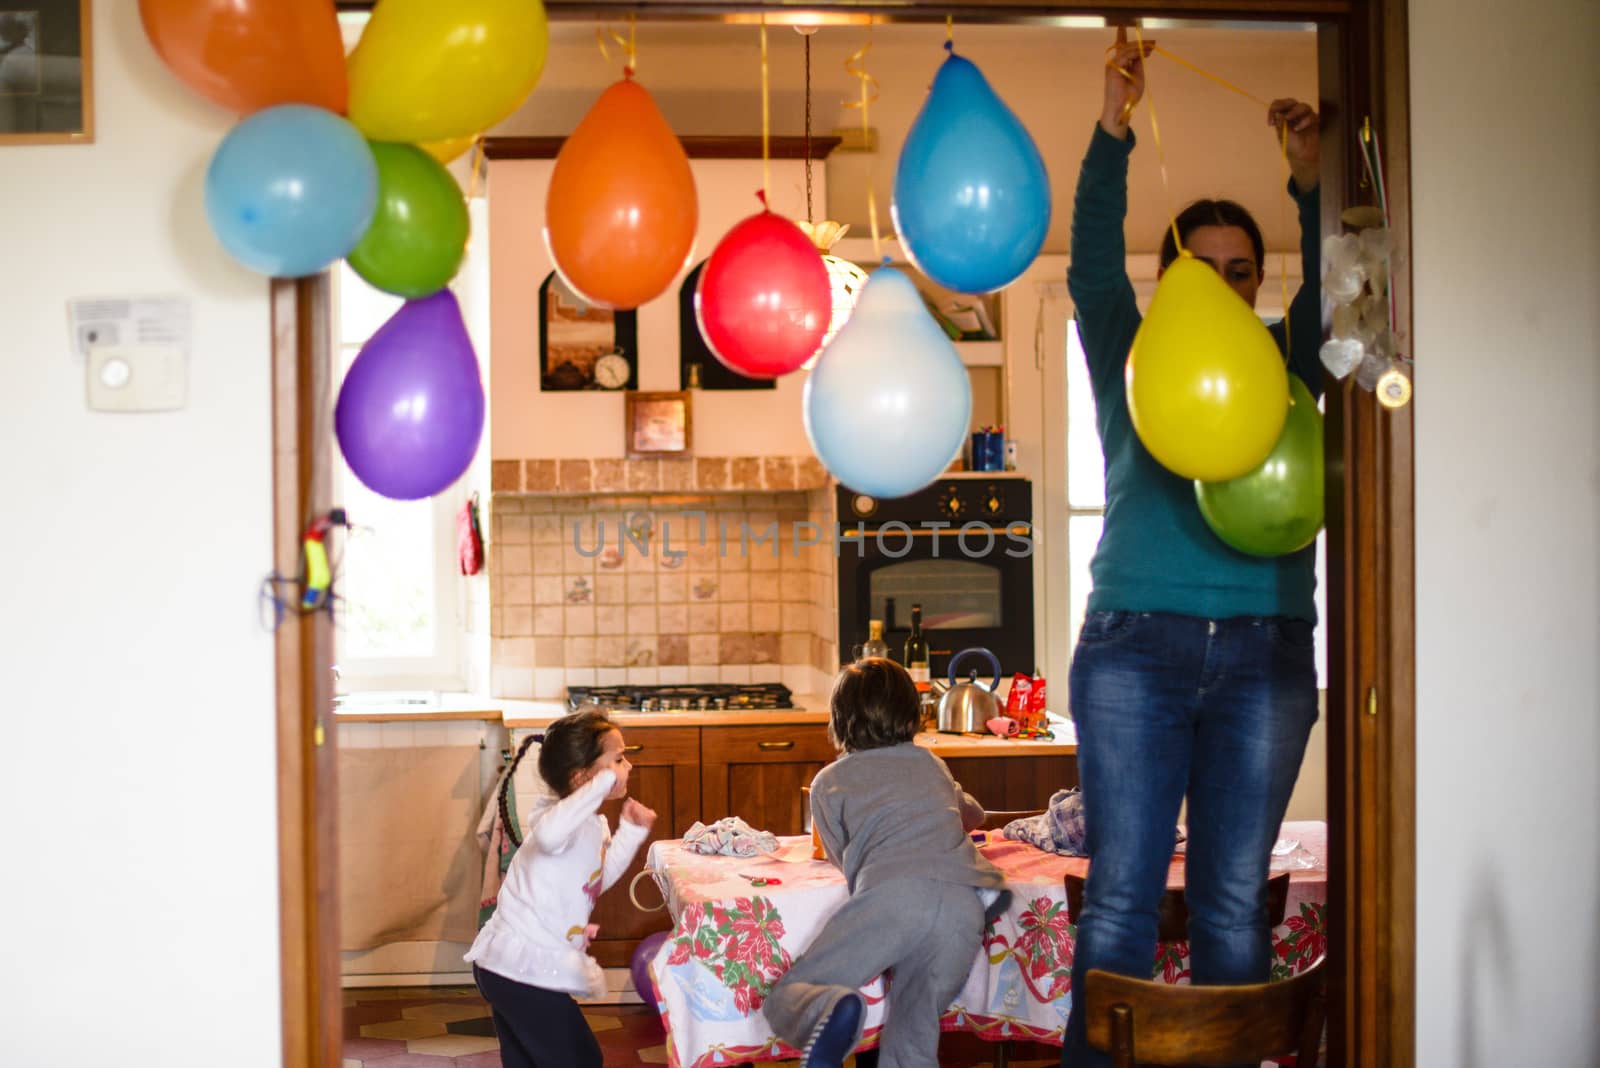 mother with children hang colorful balloons for birthday party in her home, mother standing on the chair hangs balloons at the door